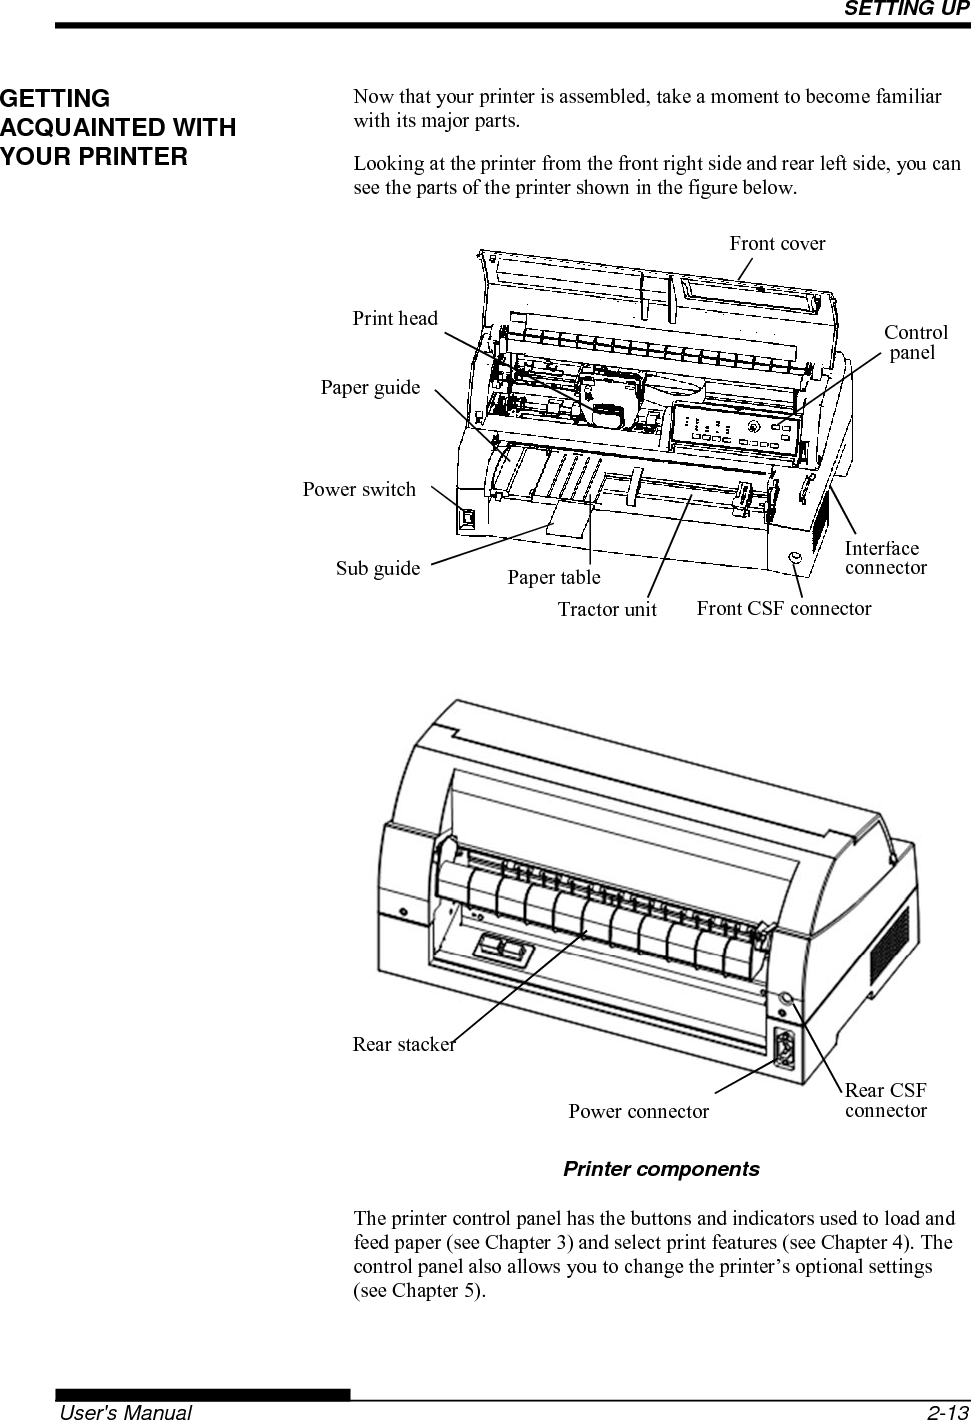 SETTING UP   User&apos;s Manual  2-13 Now that your printer is assembled, take a moment to become familiar with its major parts. Looking at the printer from the front right side and rear left side, you can see the parts of the printer shown in the figure below.                       Printer components The printer control panel has the buttons and indicators used to load and feed paper (see Chapter 3) and select print features (see Chapter 4). The control panel also allows you to change the printer’s optional settings (see Chapter 5). GETTING ACQUAINTED WITH YOUR PRINTER Print headPaper guidePower switchControl panel InterfaceconnectorSub guide Paper tableTractor unit Front CSF connector Front cover Rear stackerPower connectorRear CSF connector